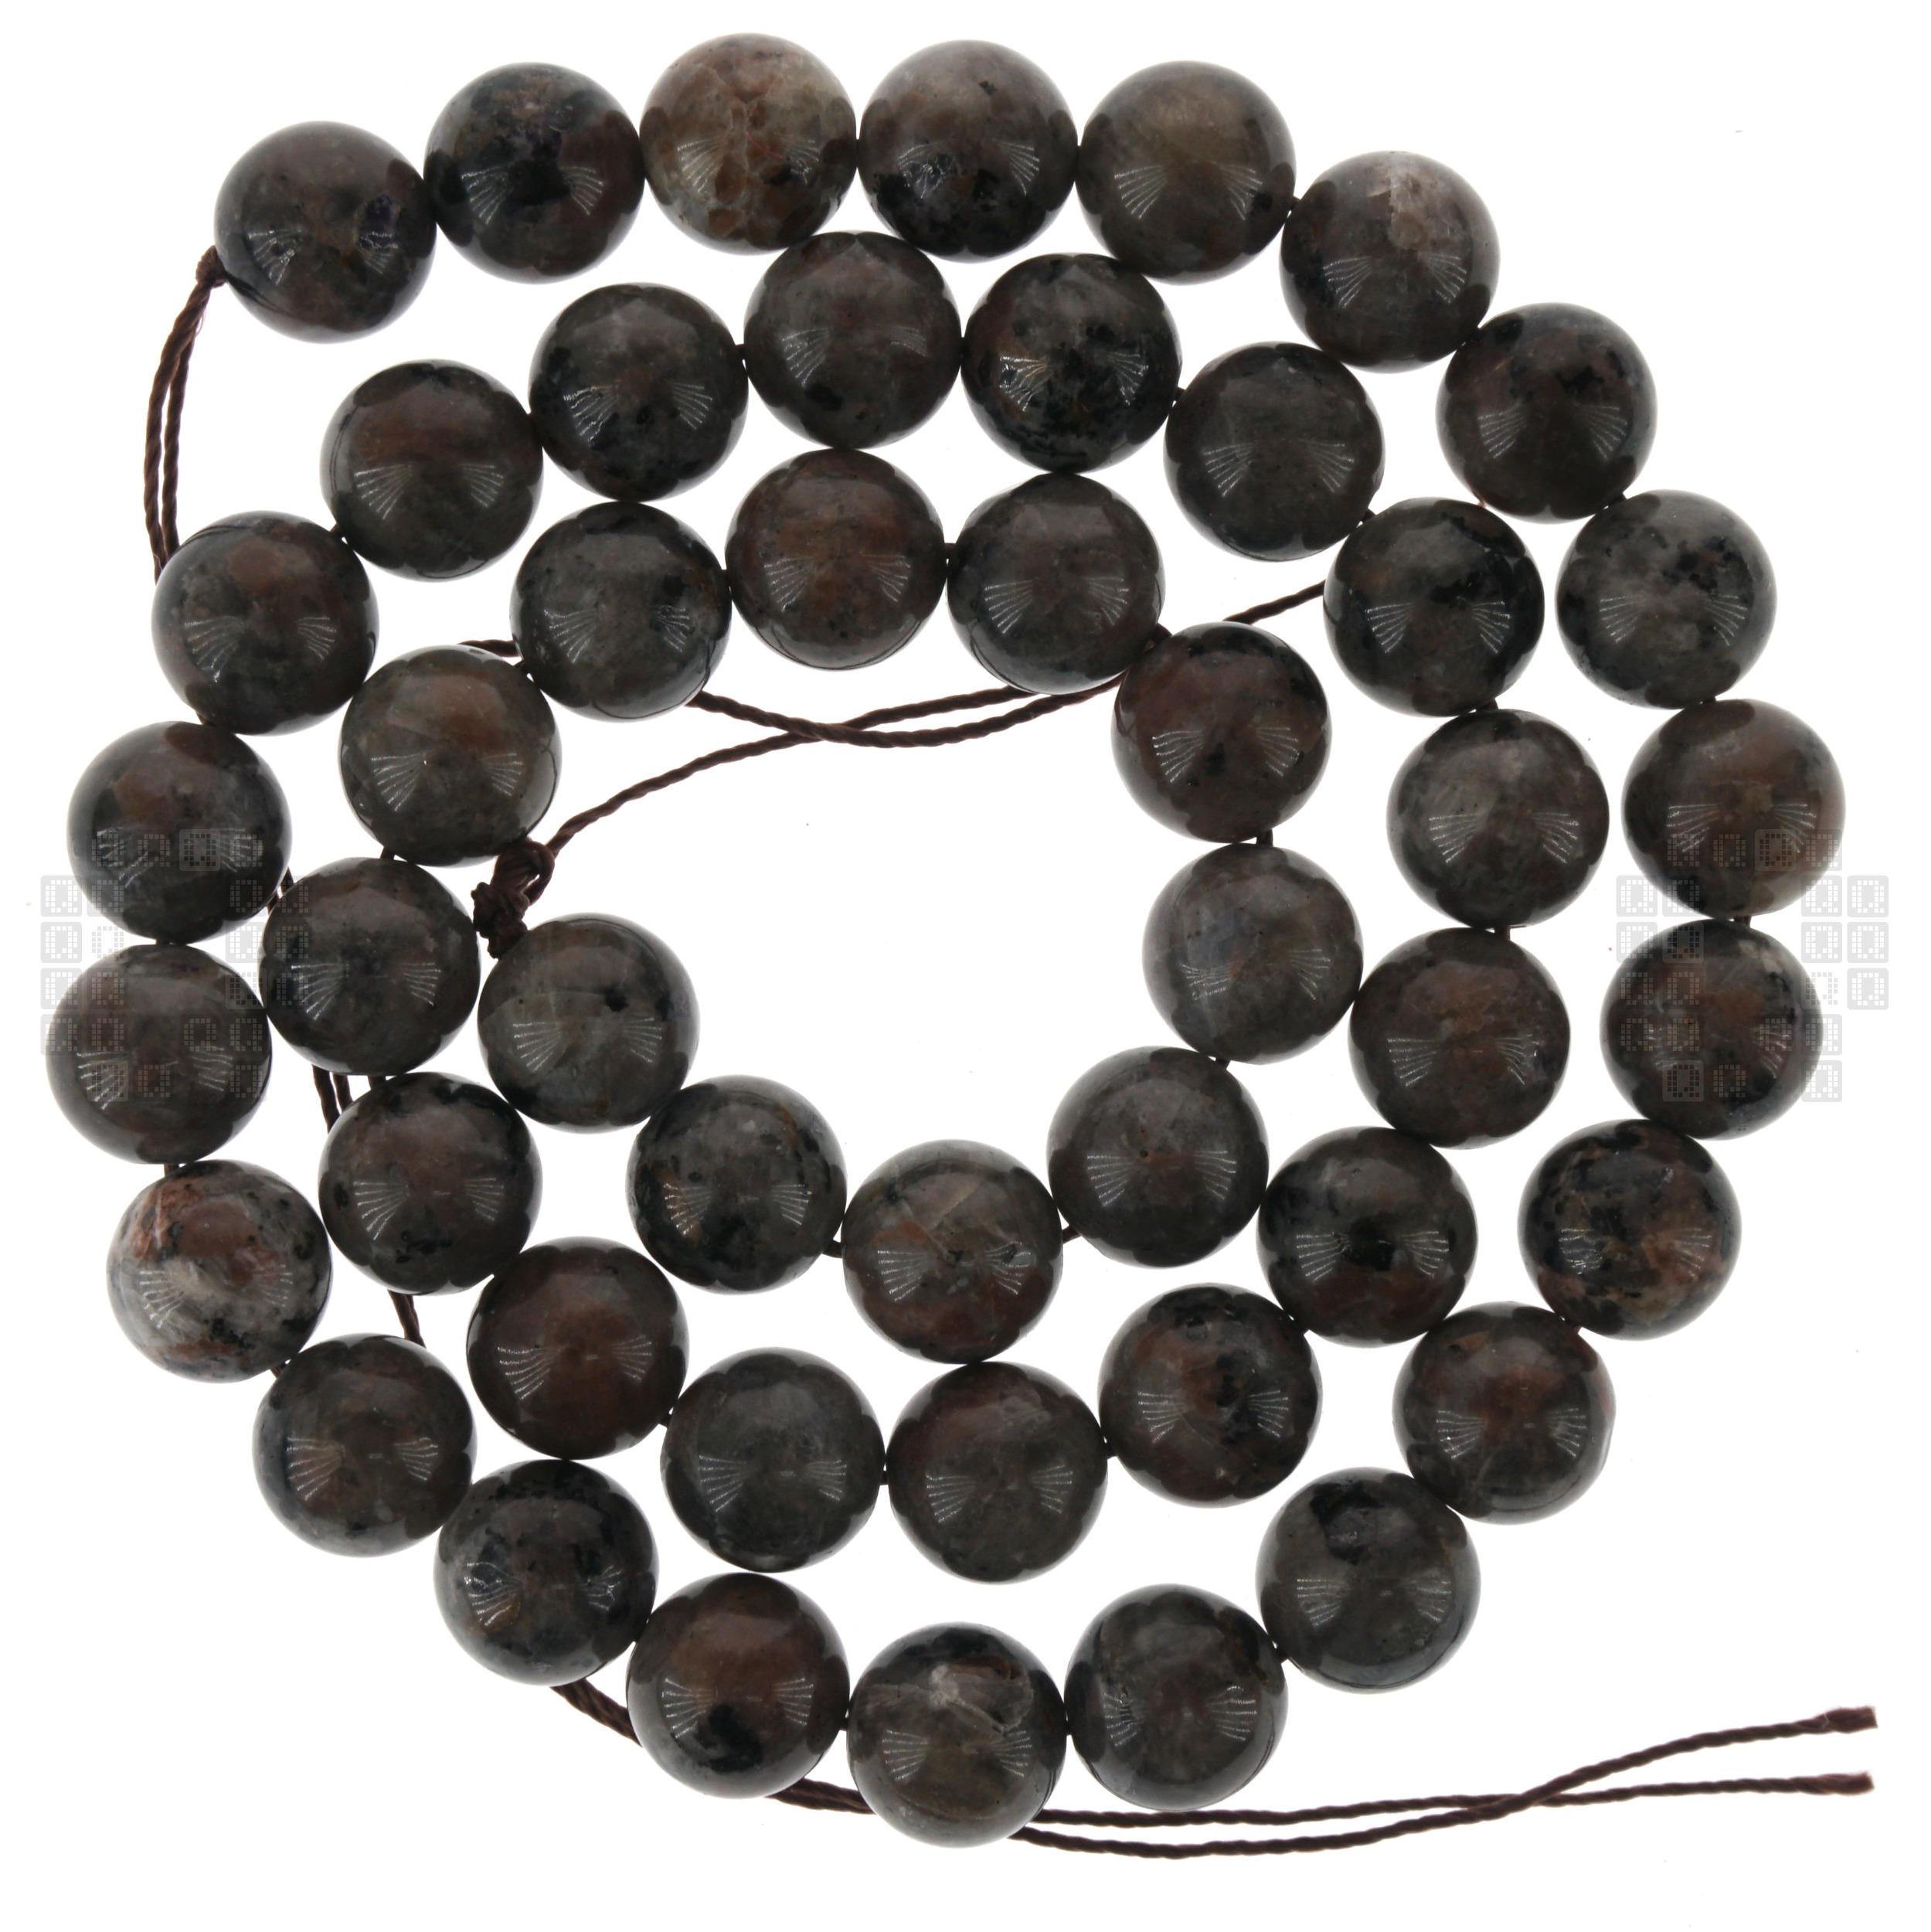 Yooperlite / Natural Flame Stone Round Beads, 45 Pieces